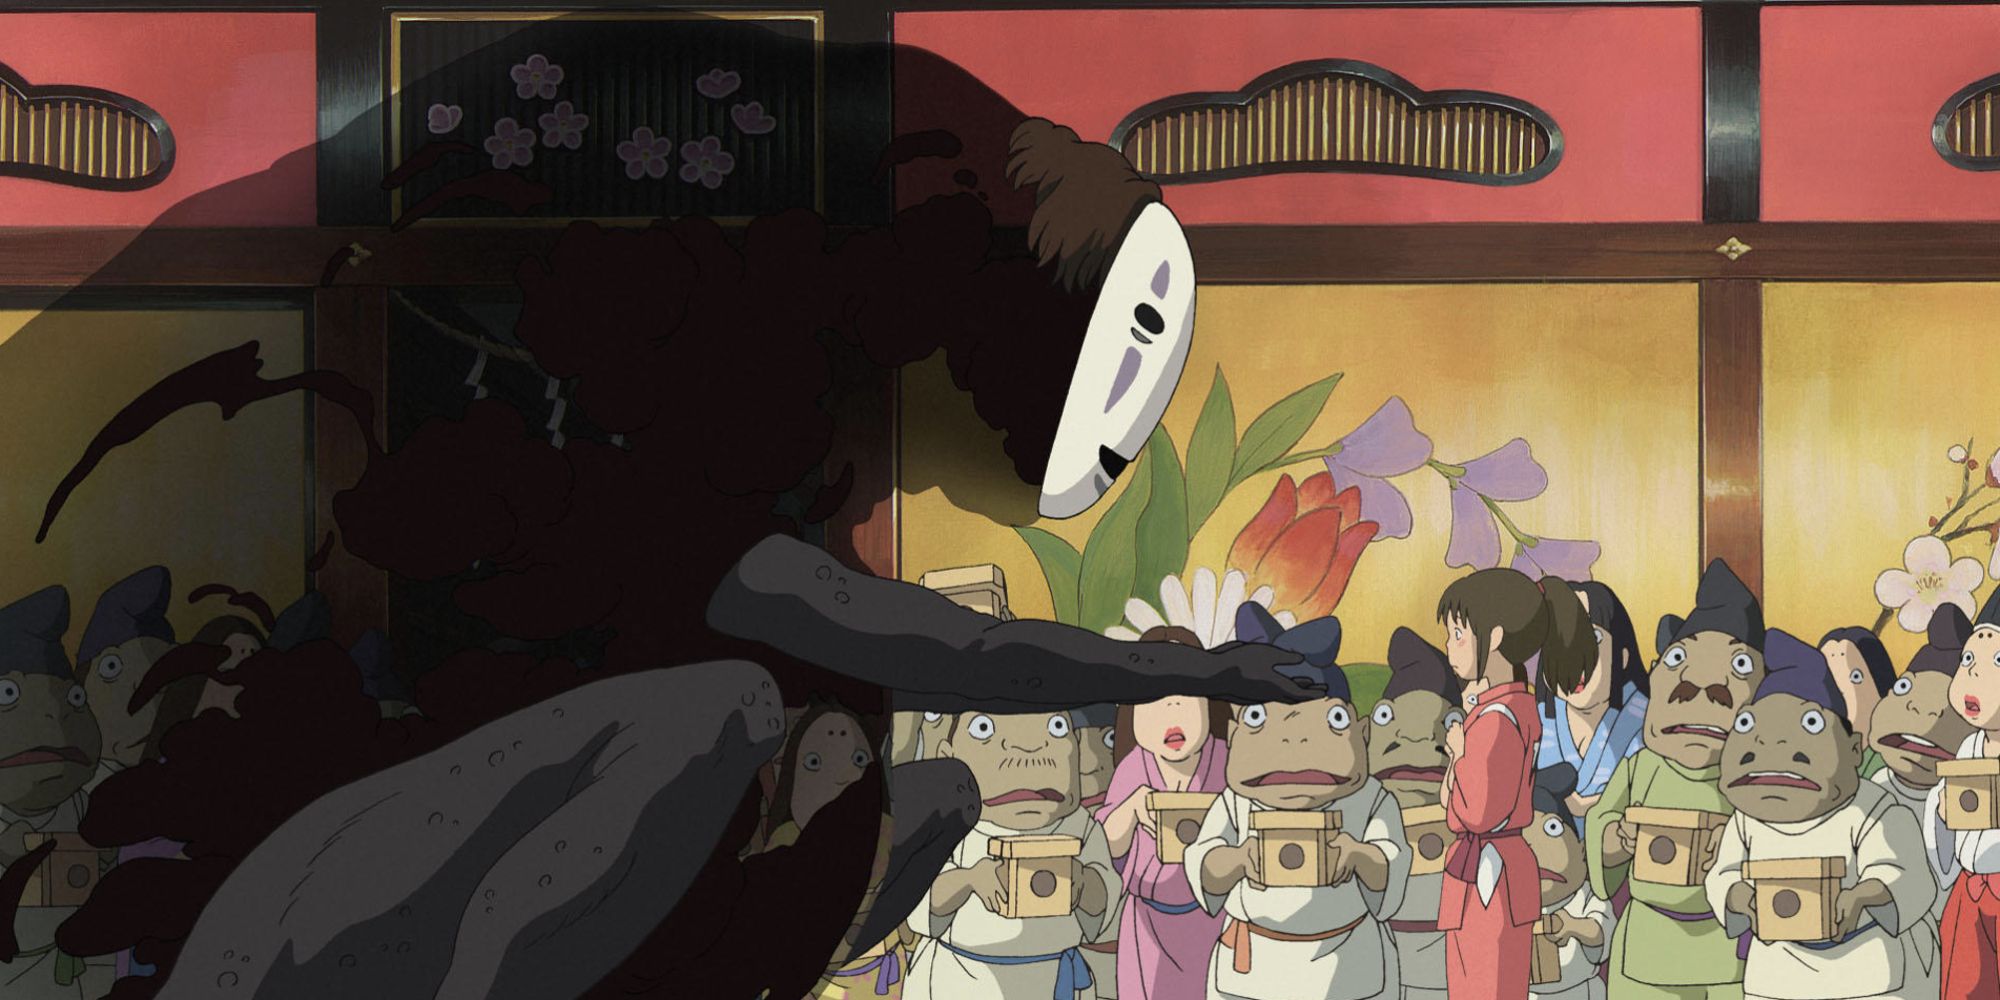 No Face in Spirited Away